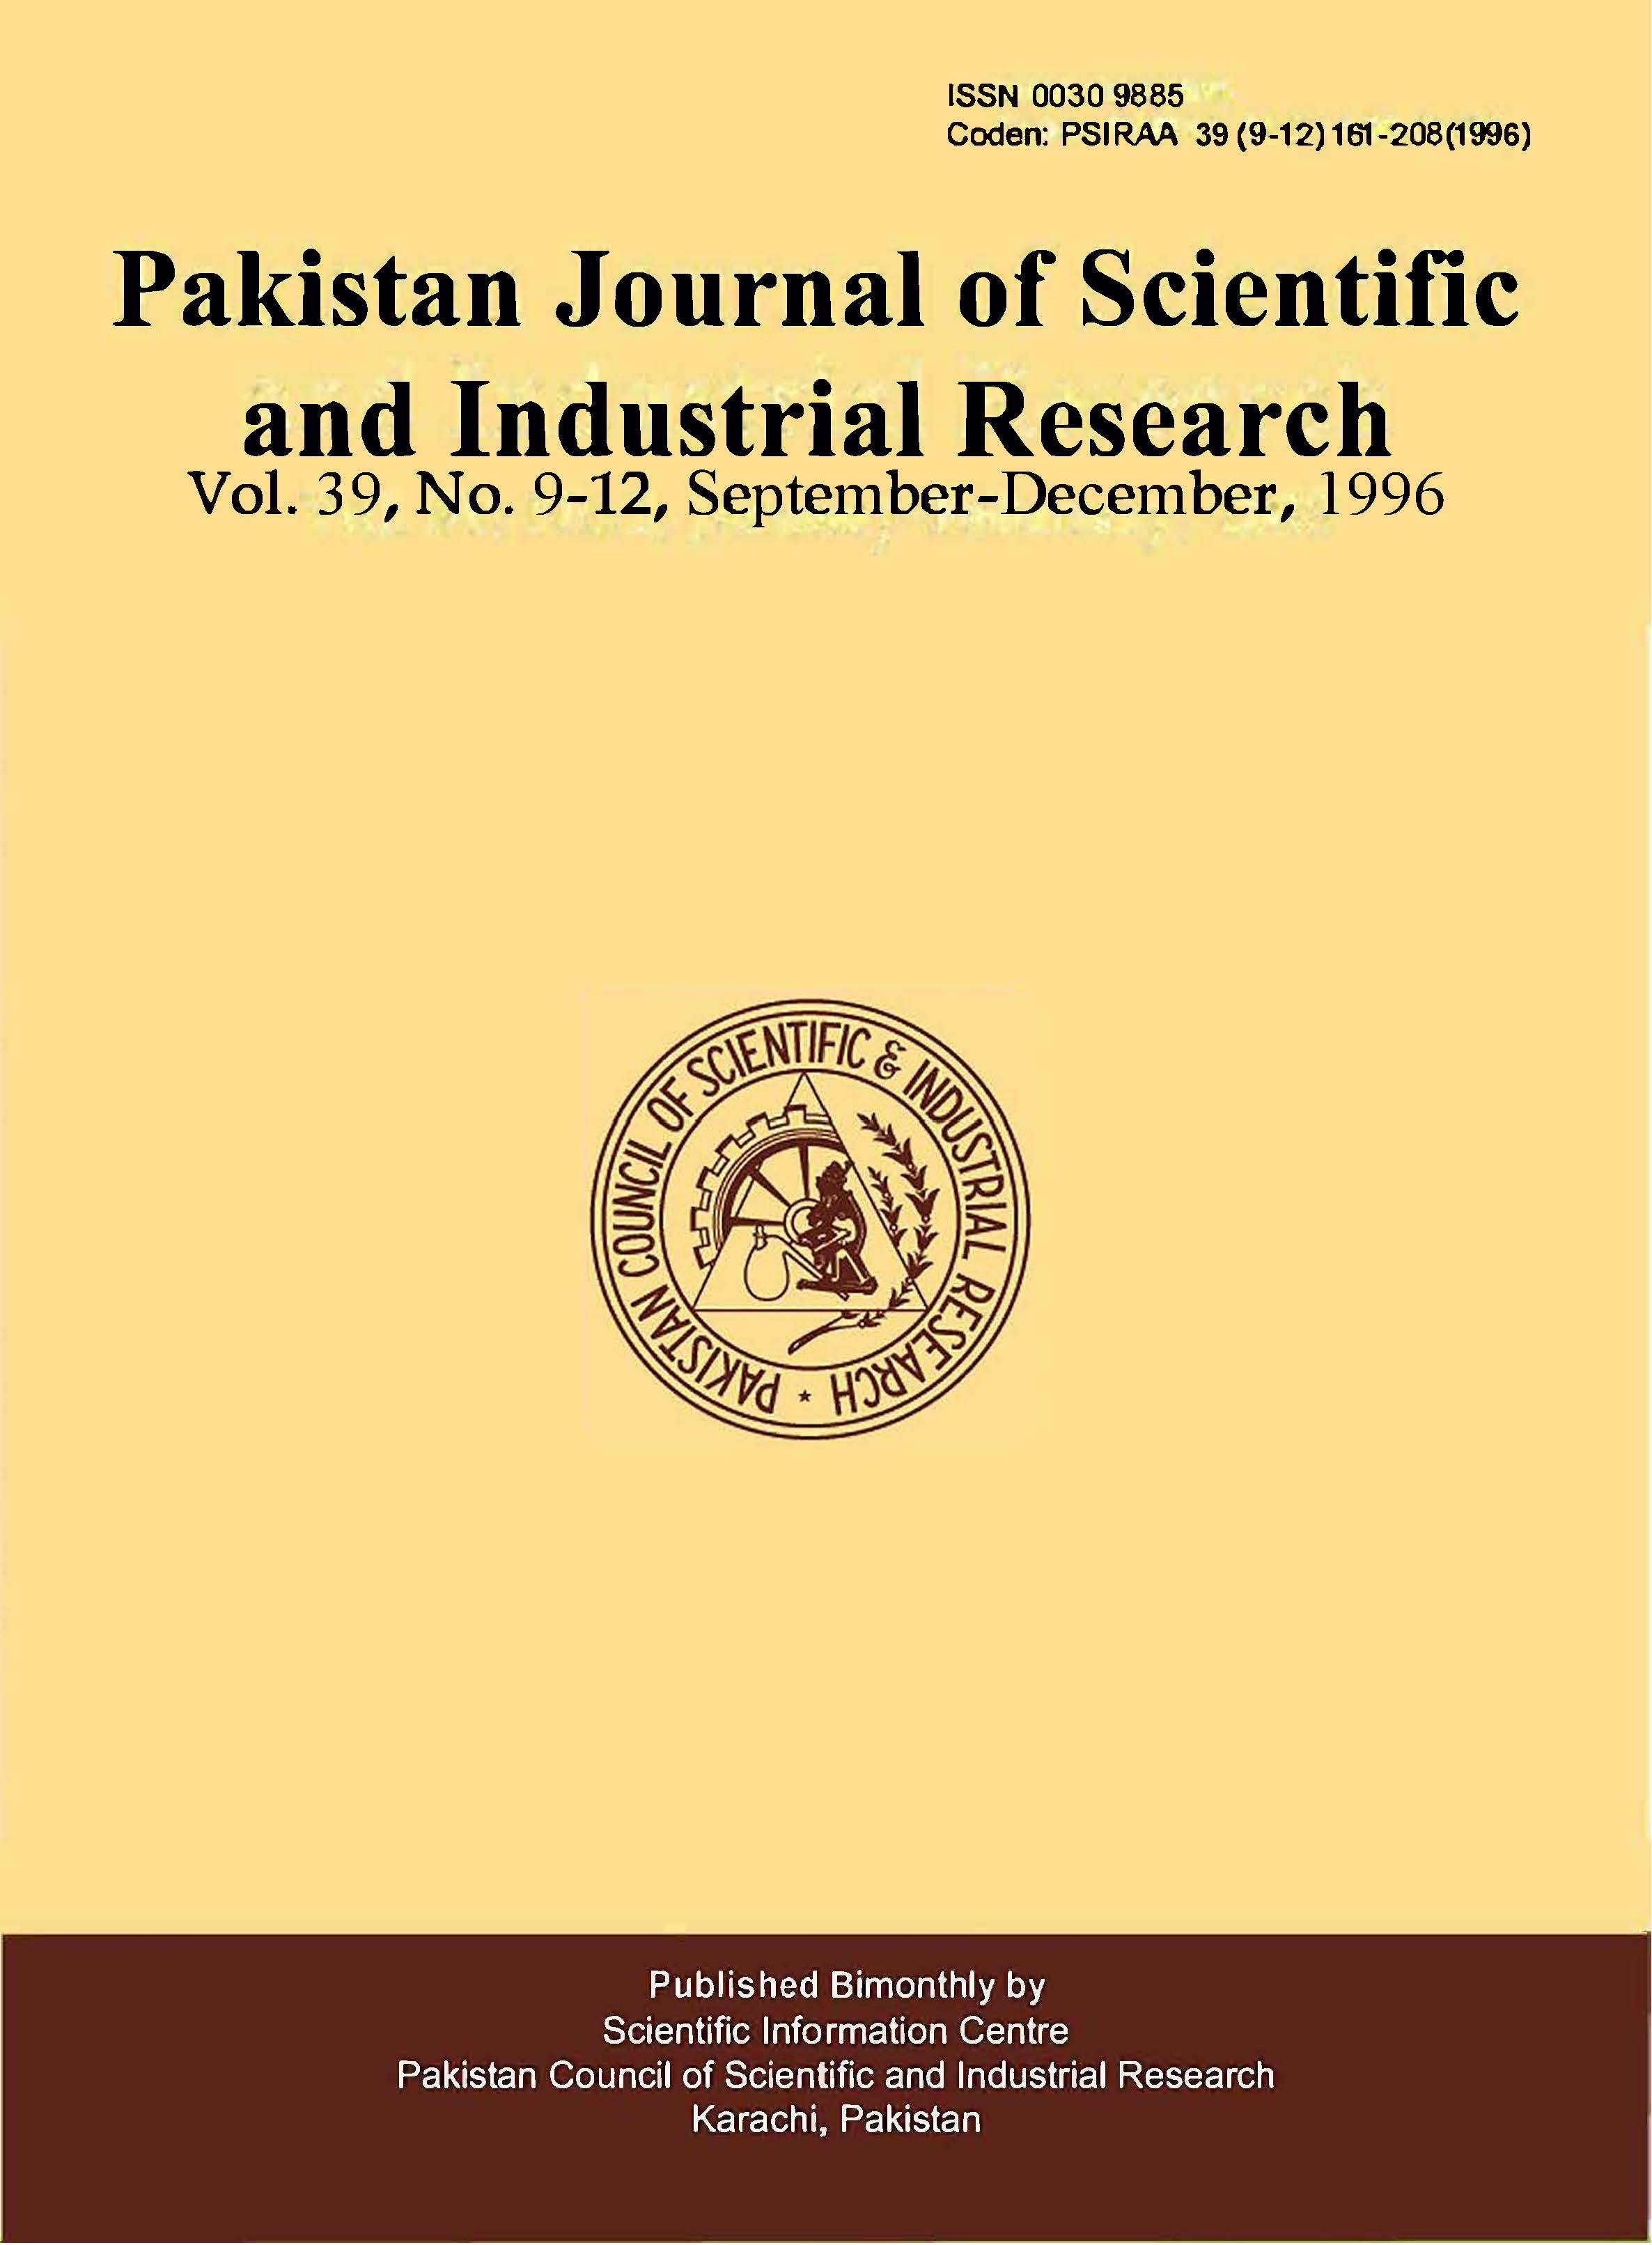 					View Vol. 39 No. 9-12 (1996): Pakistan Journal of Scientific and Industrial Research
				